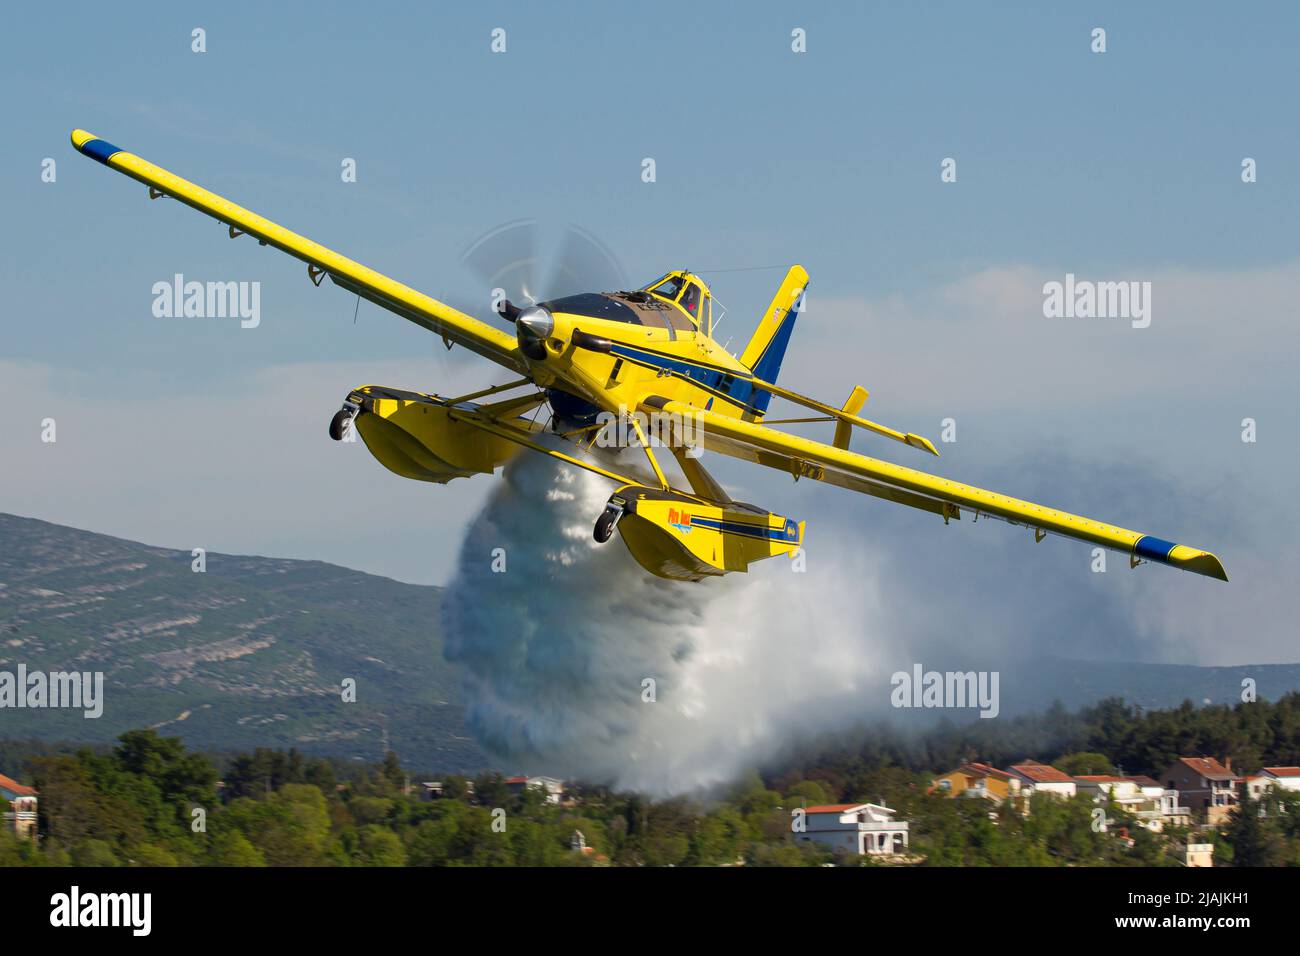 A Croatian Air Force AT-802 firefighting aircraft dropping water during a training flight, Croatia. Stock Photo